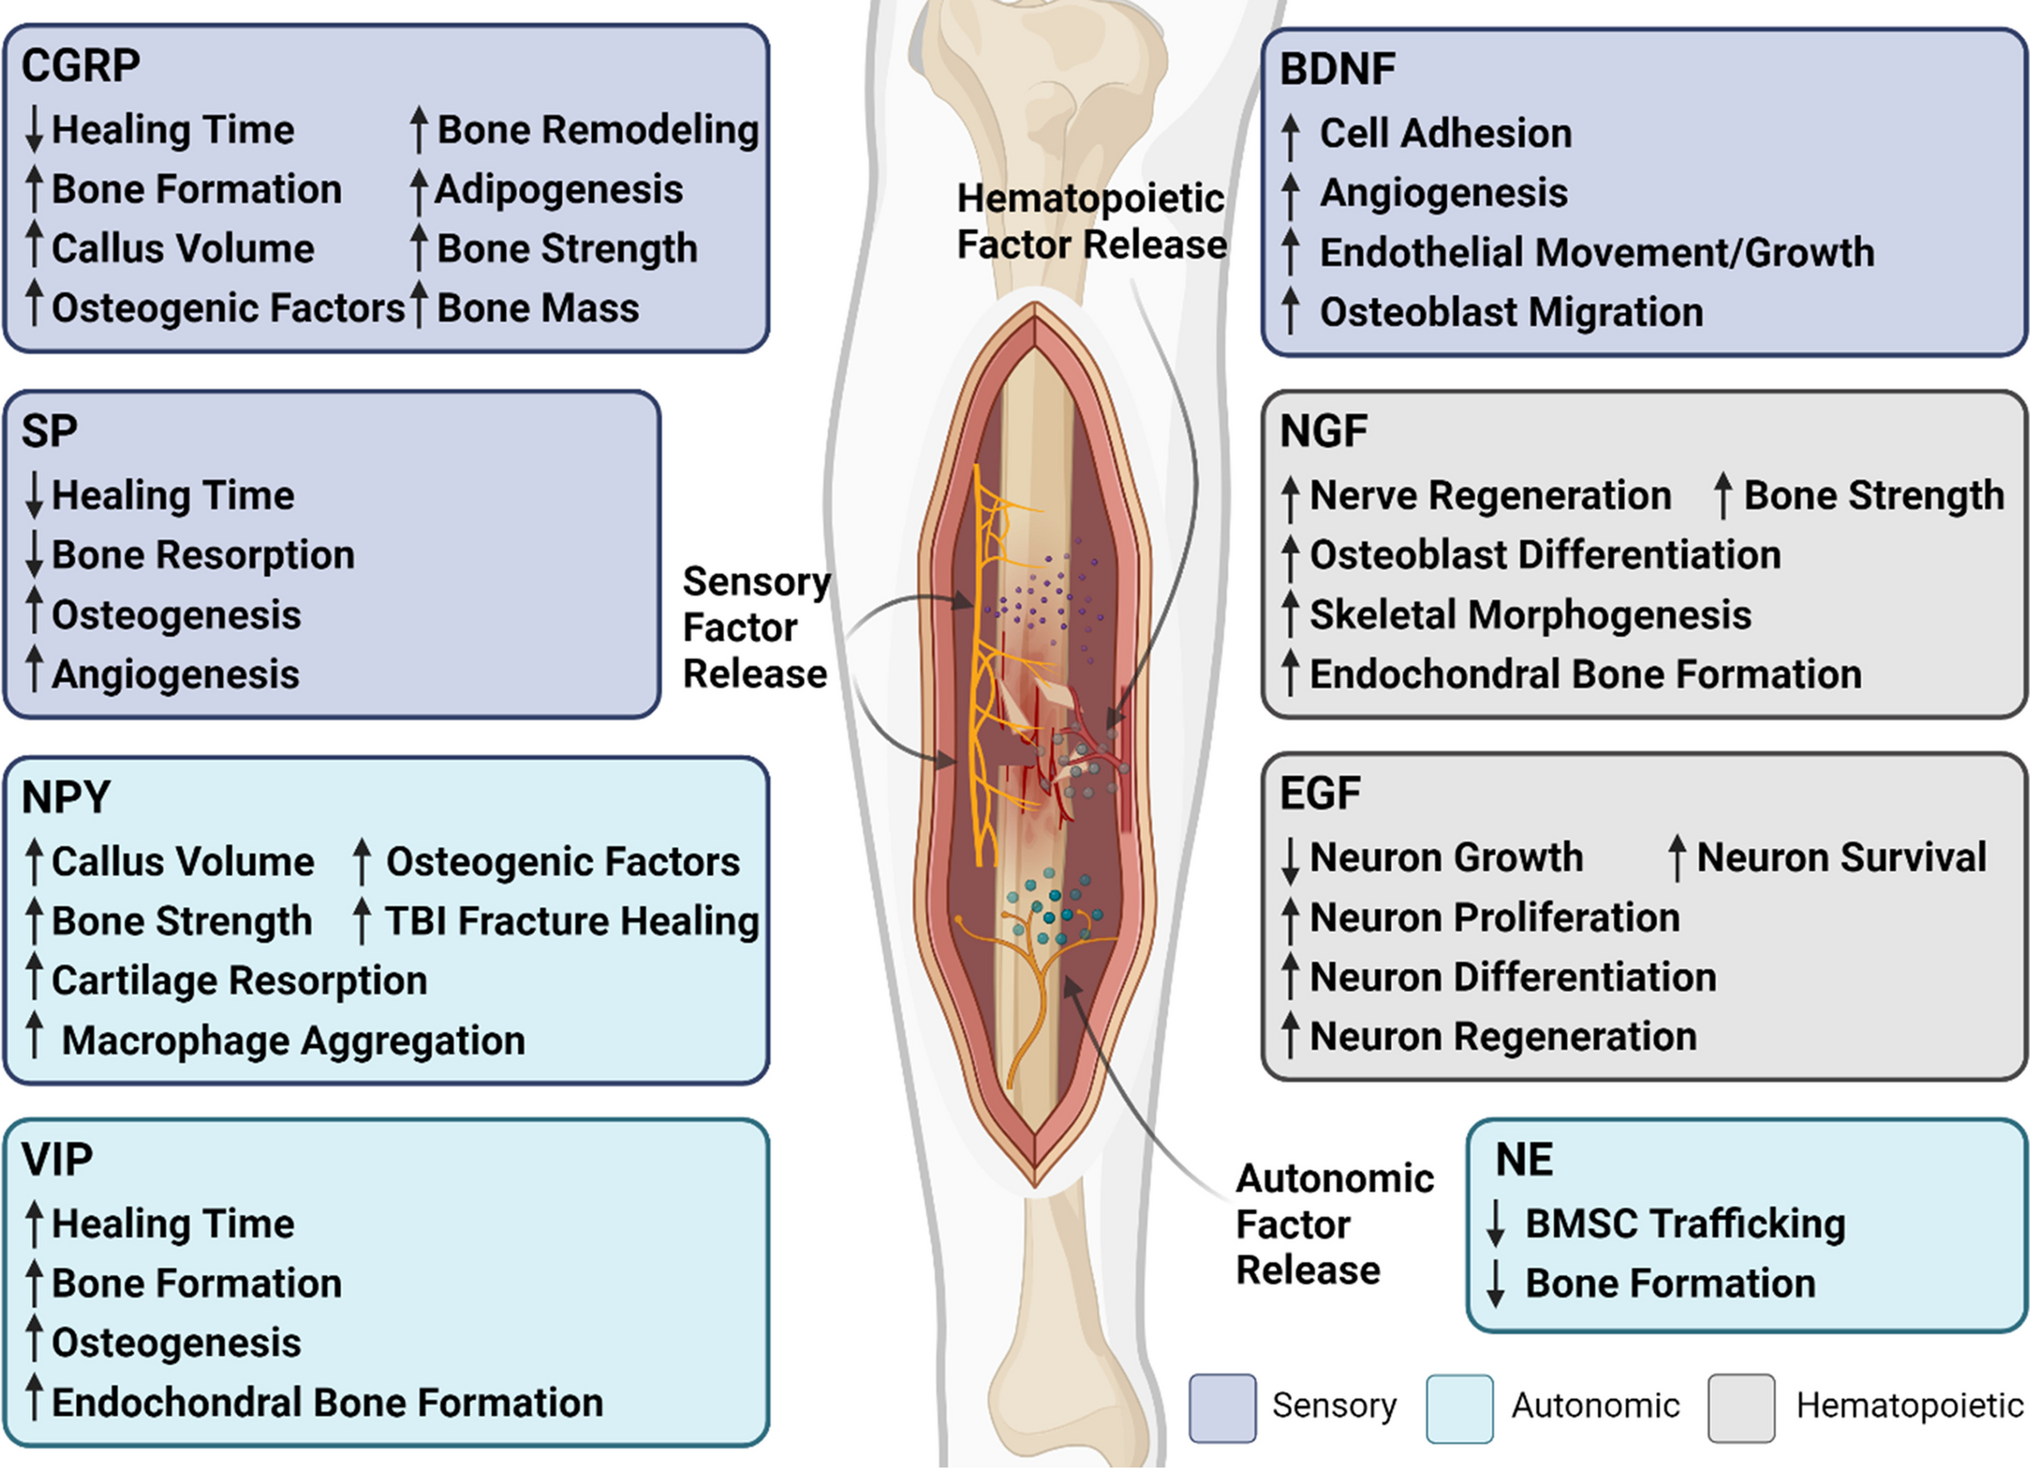 Role of the Neurologic System in Fracture Healing: An Extensive Review